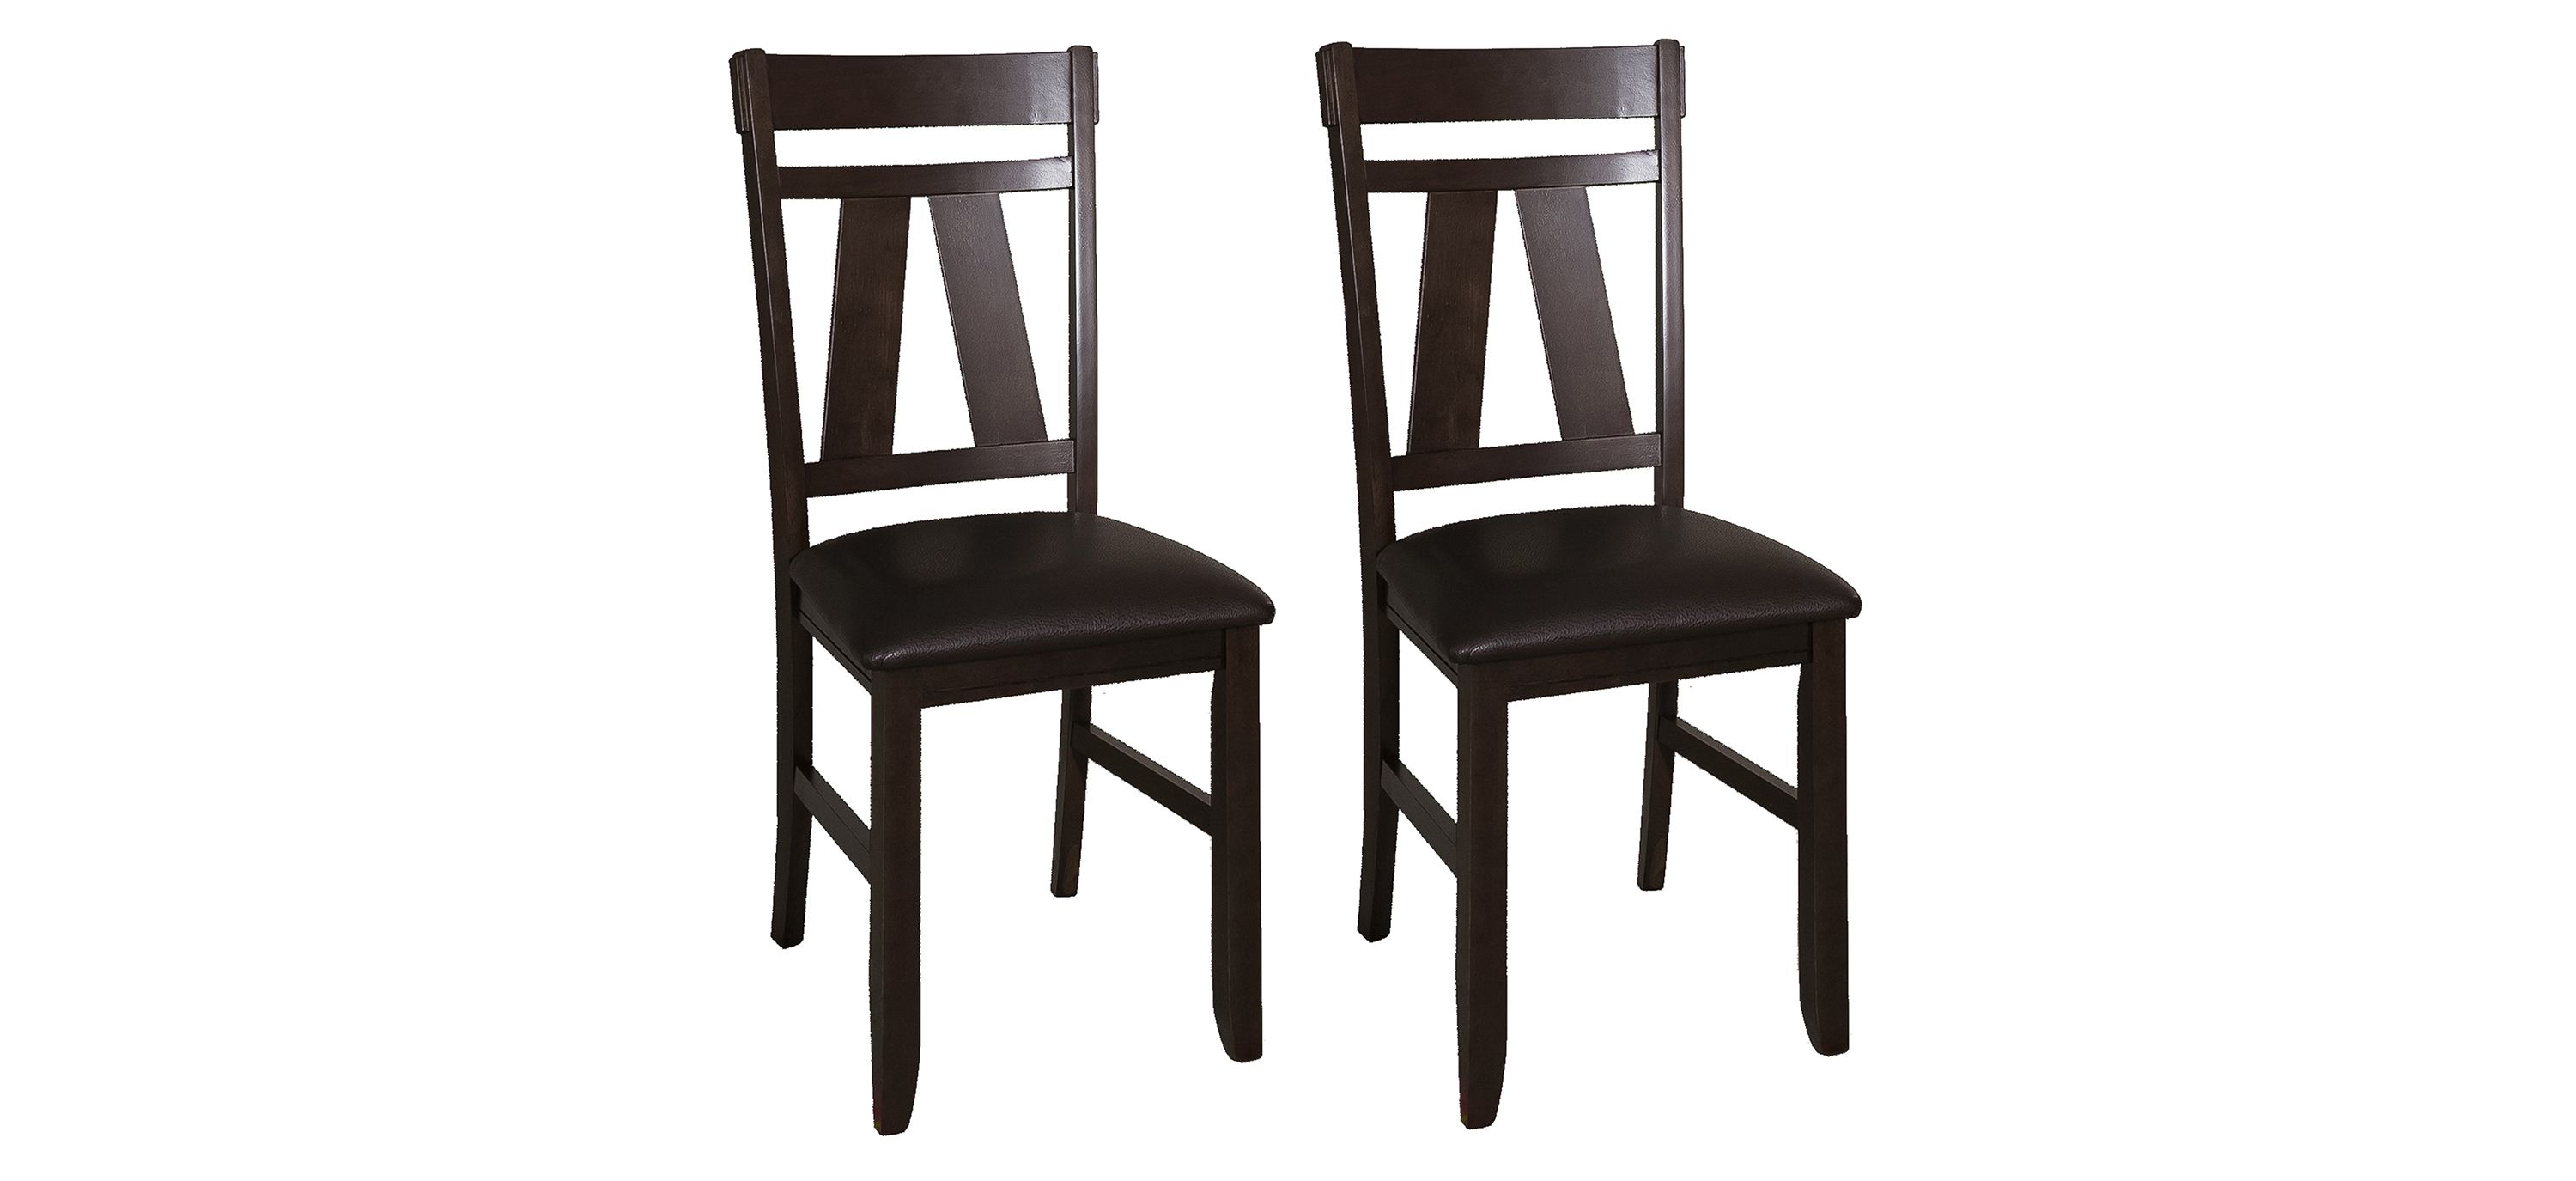 Timothy Splat Back Dining Chair-Set of 2